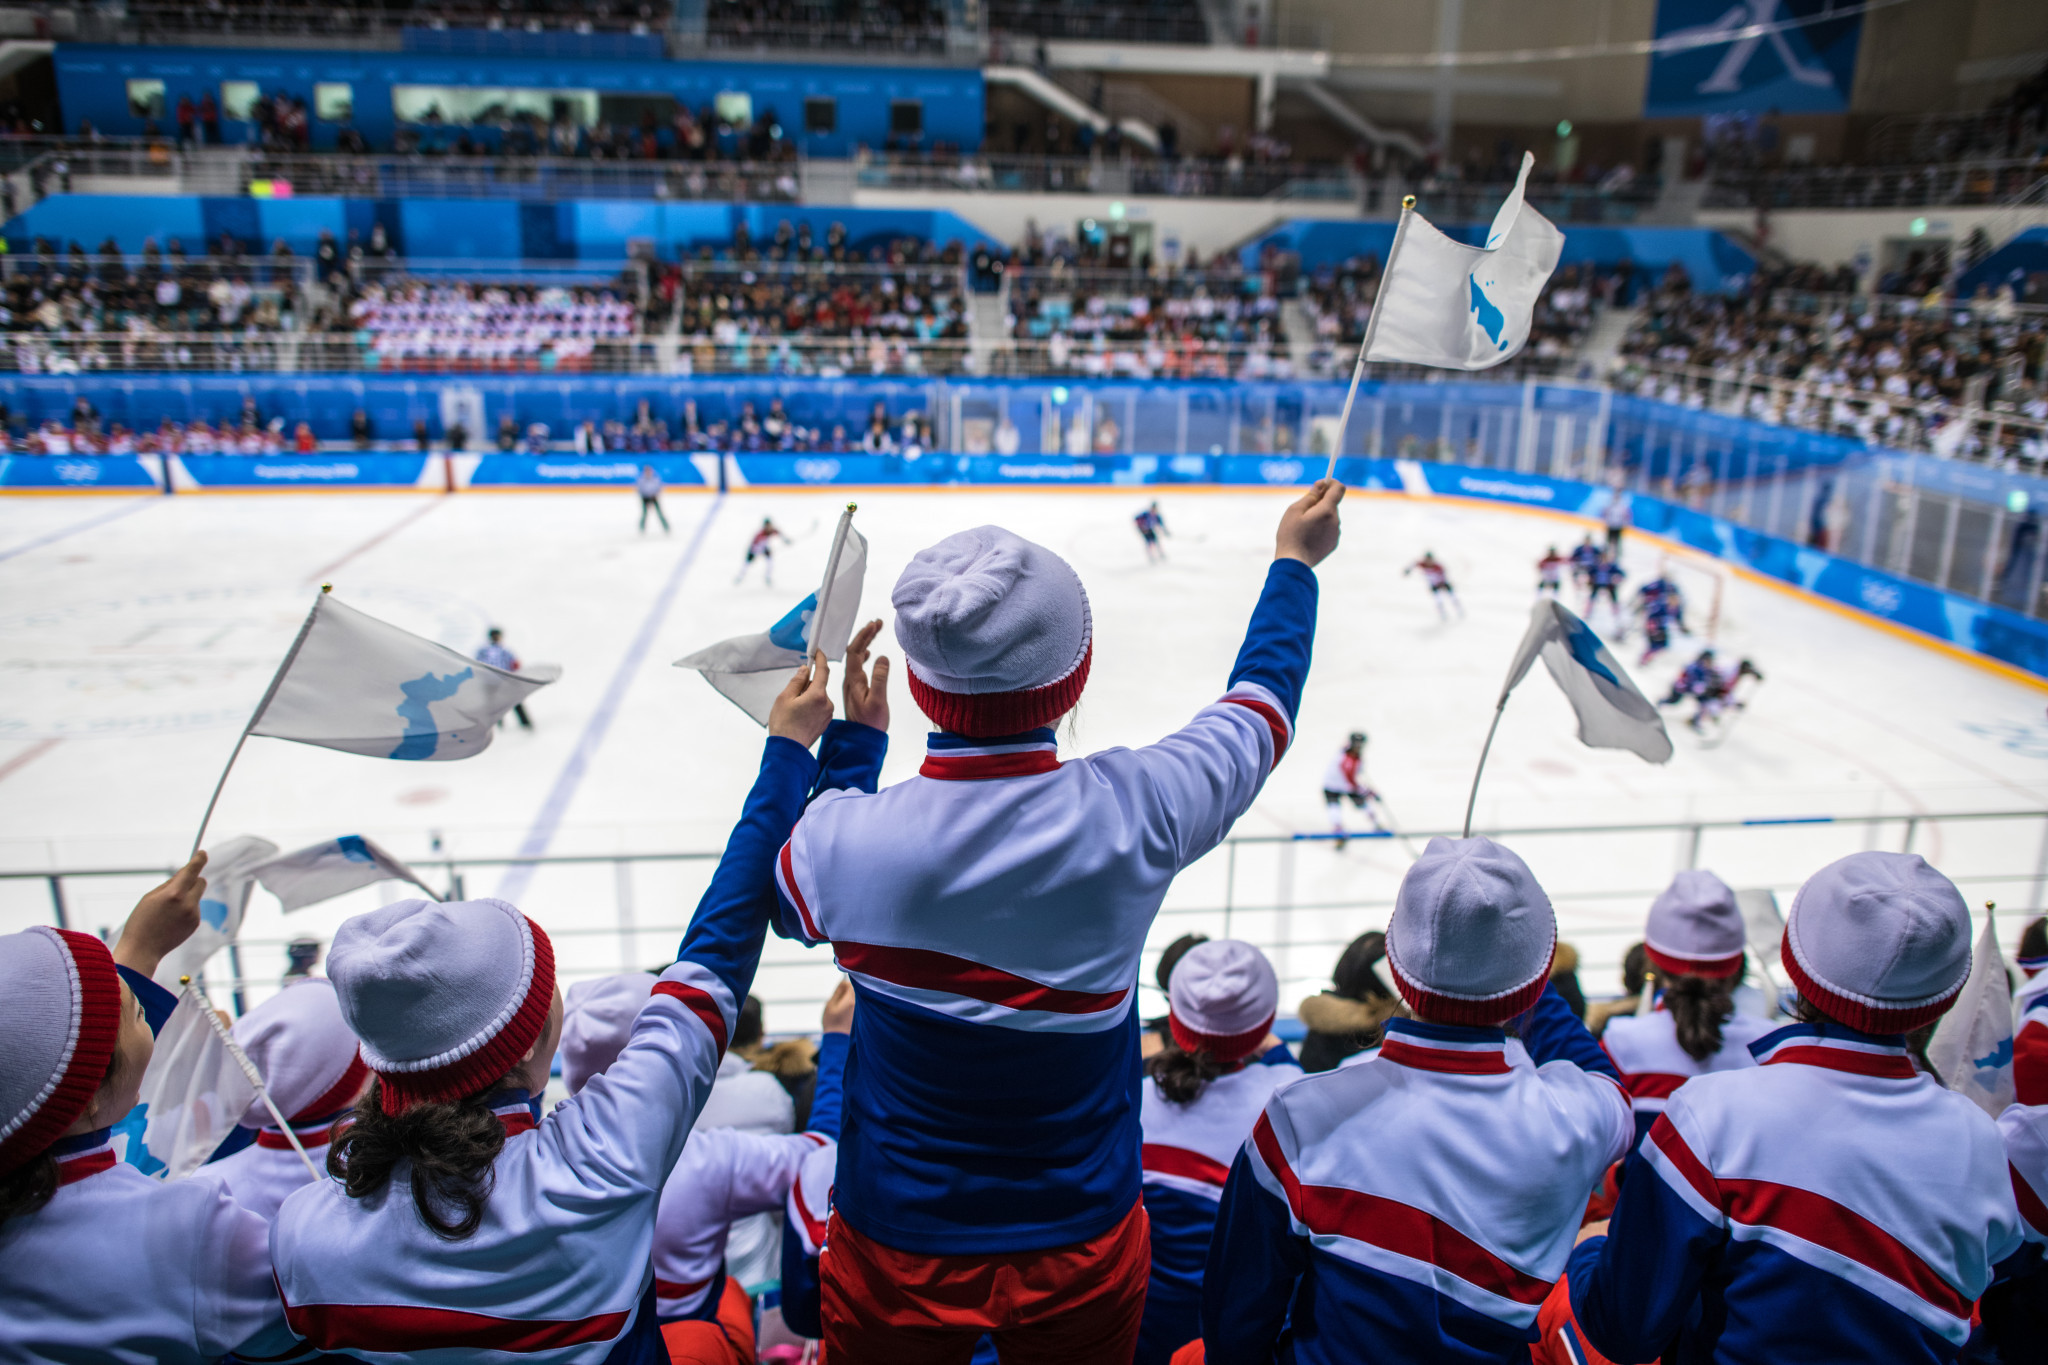 A joint Korea team competed in the women's ice hockey event at Pyeongchang 2018 and were supported by fans waving the unified flag ©Getty Images